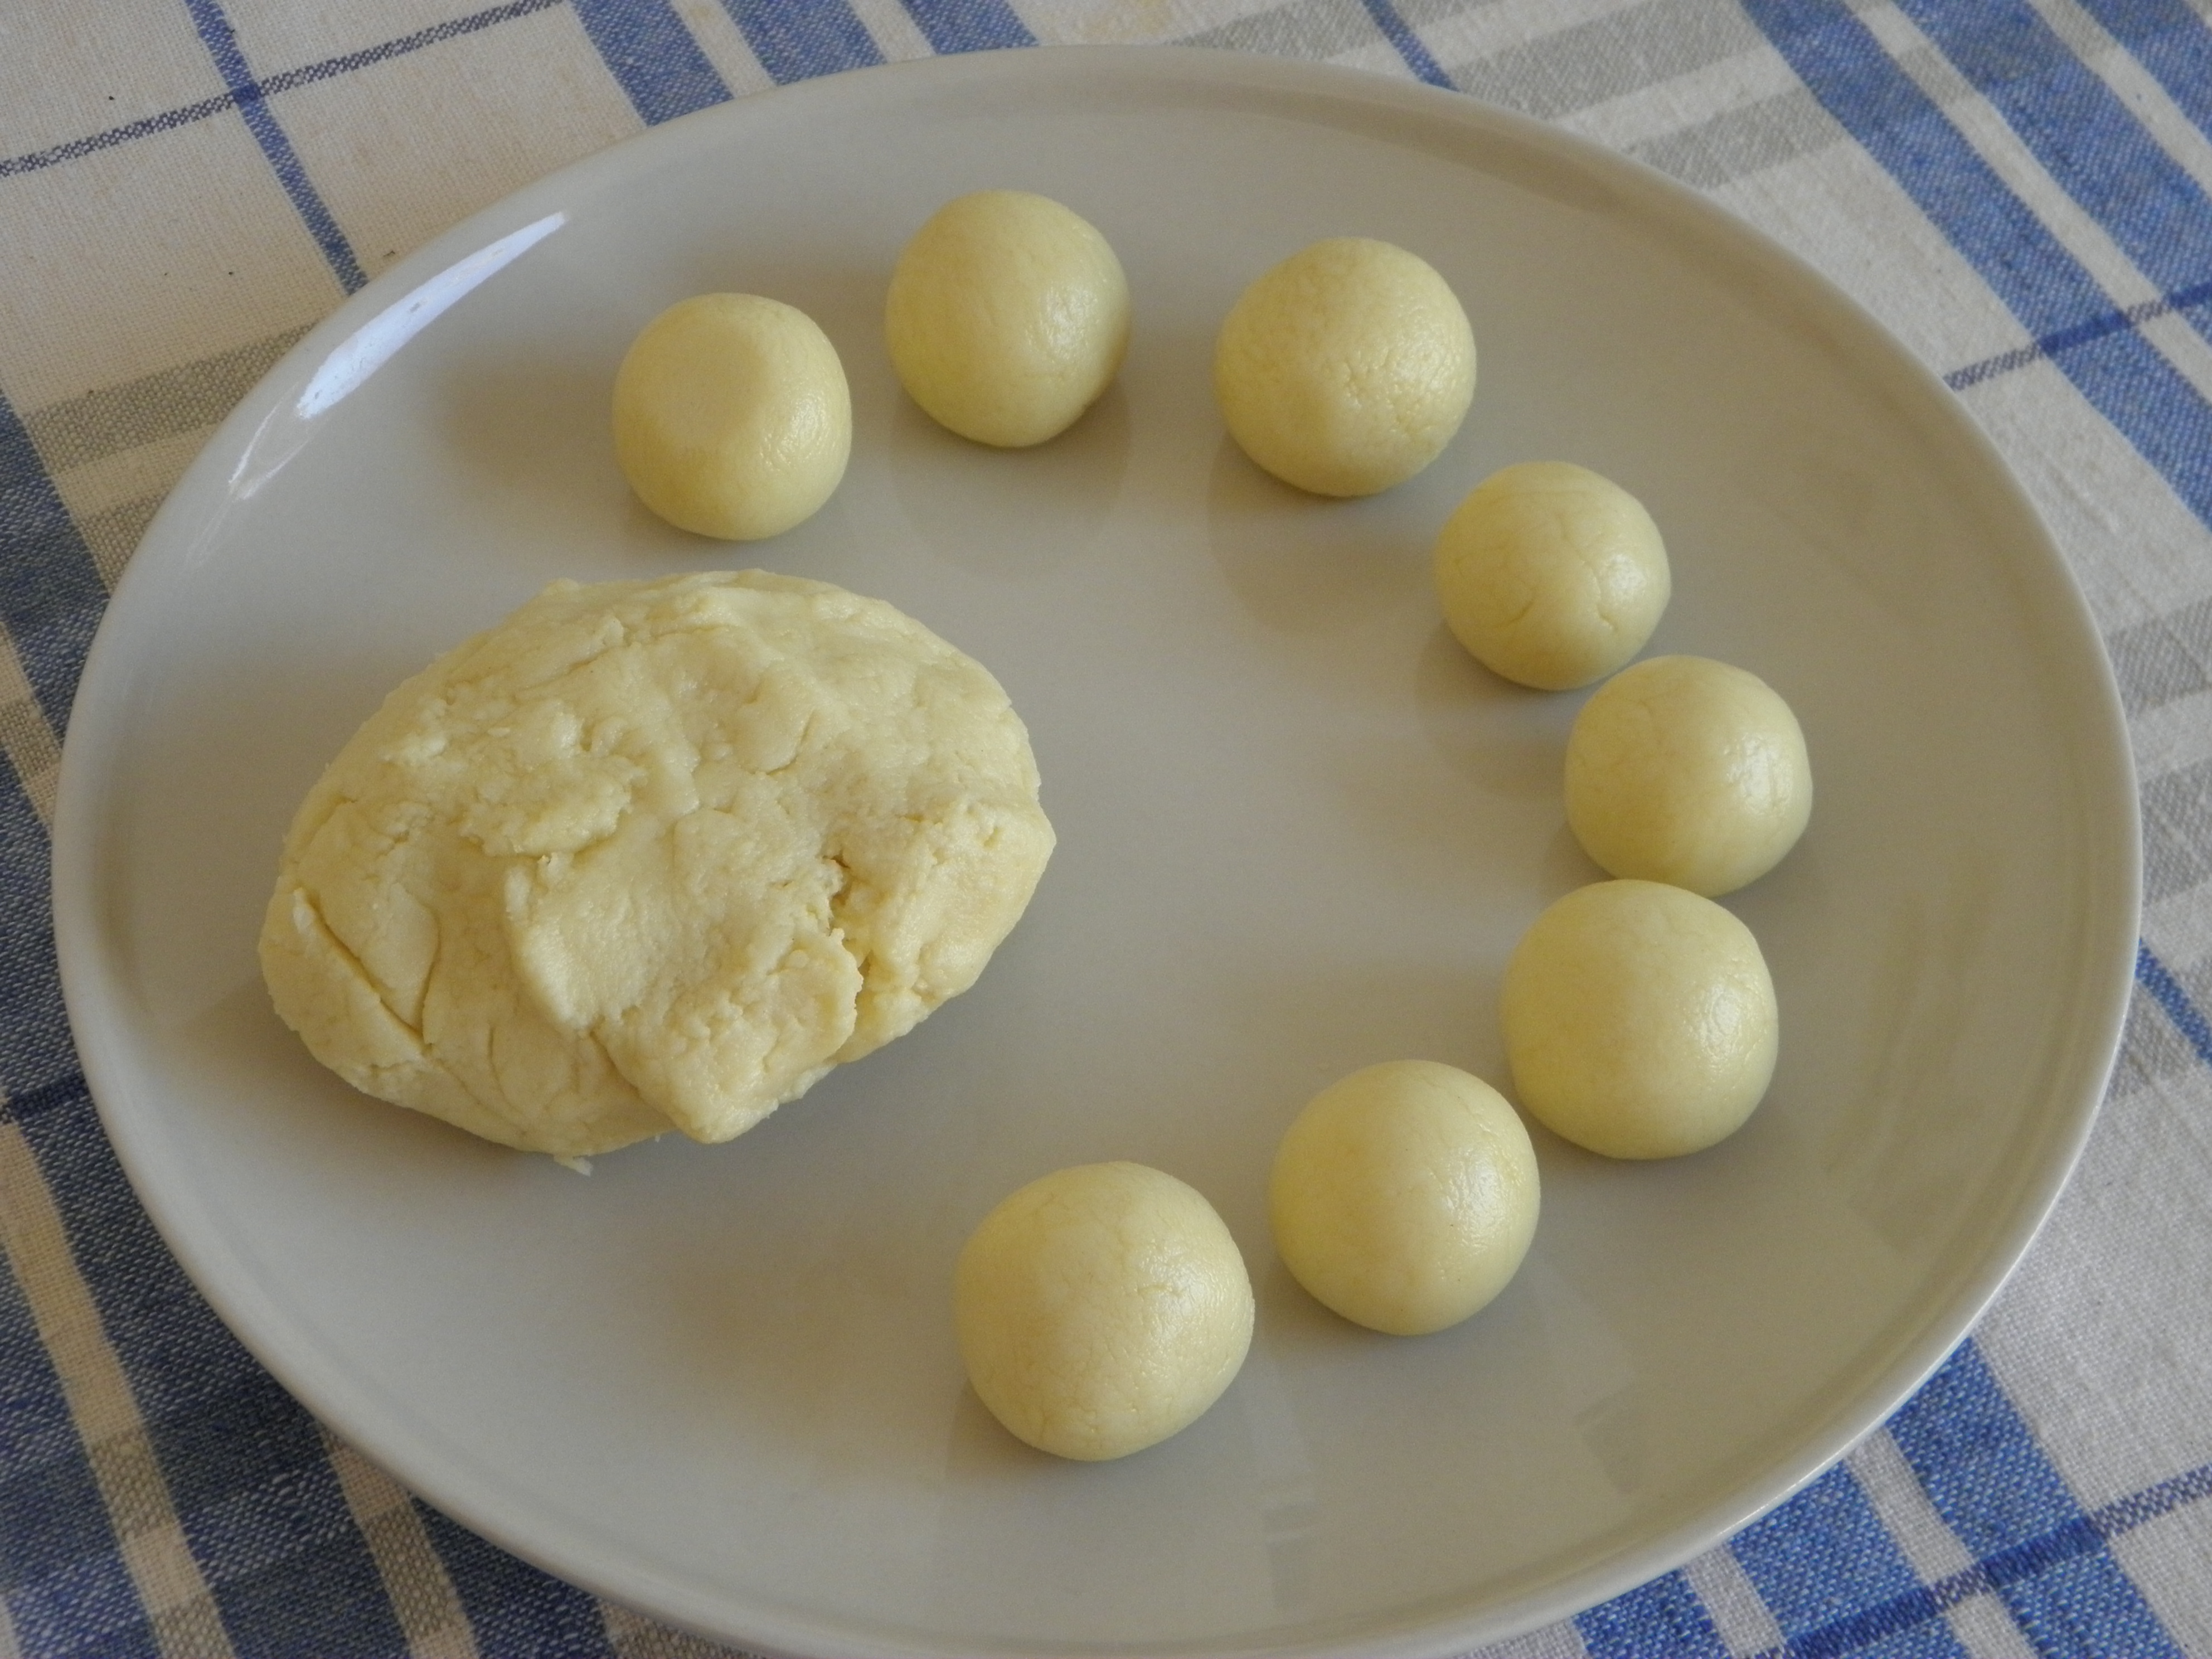 Making of round balls from the dough